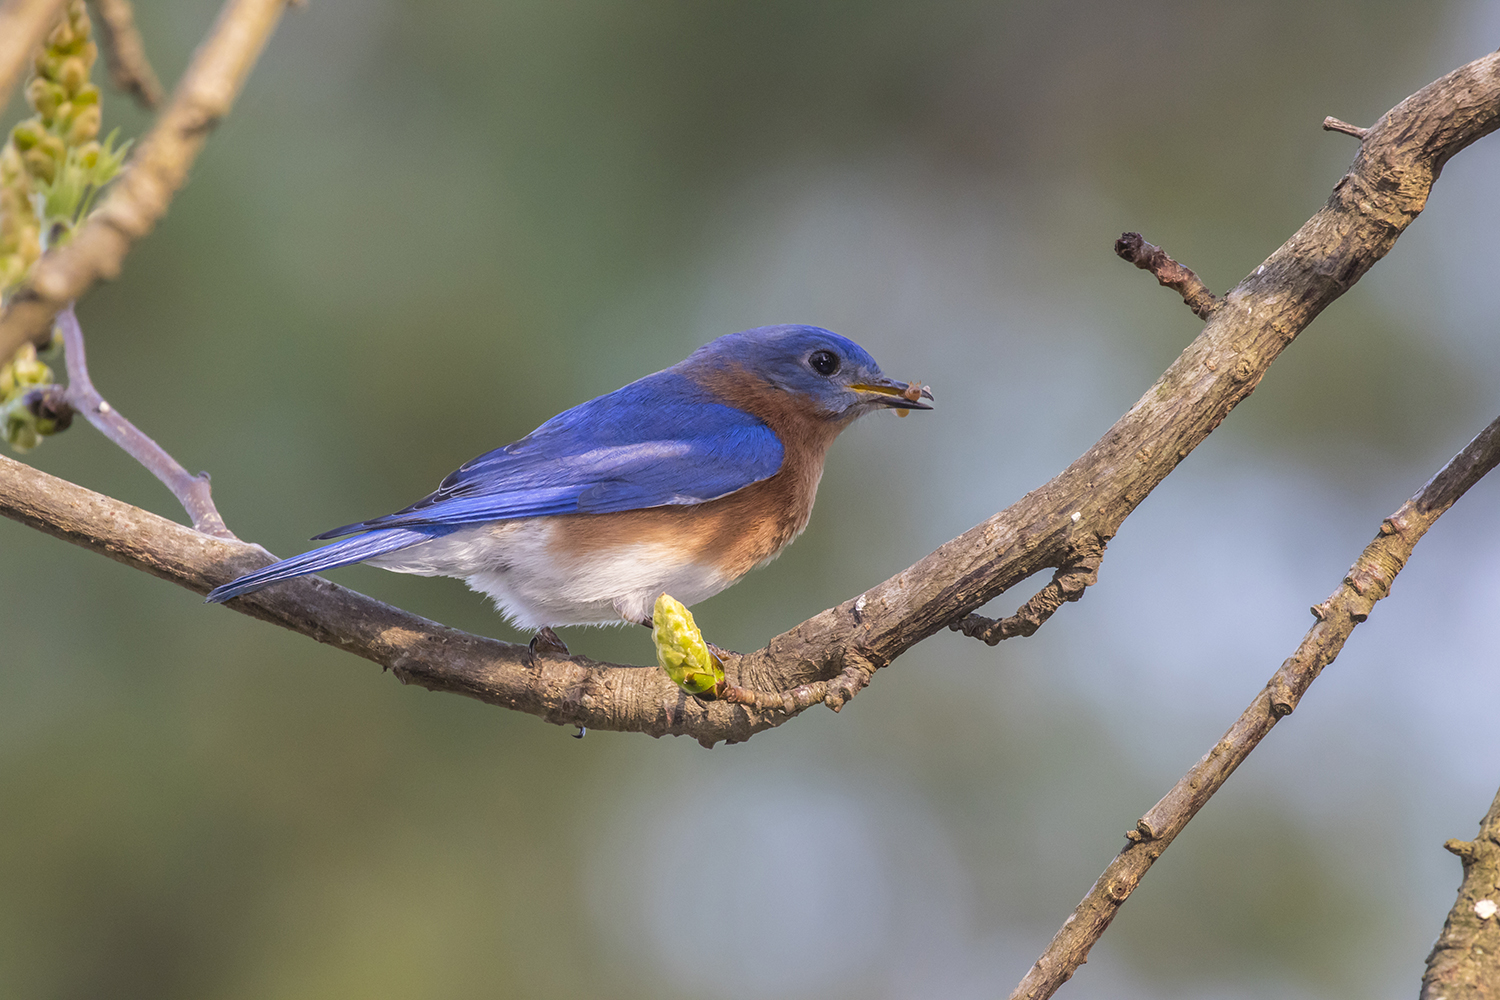 Songbirds’ spring plumage is colorful by design